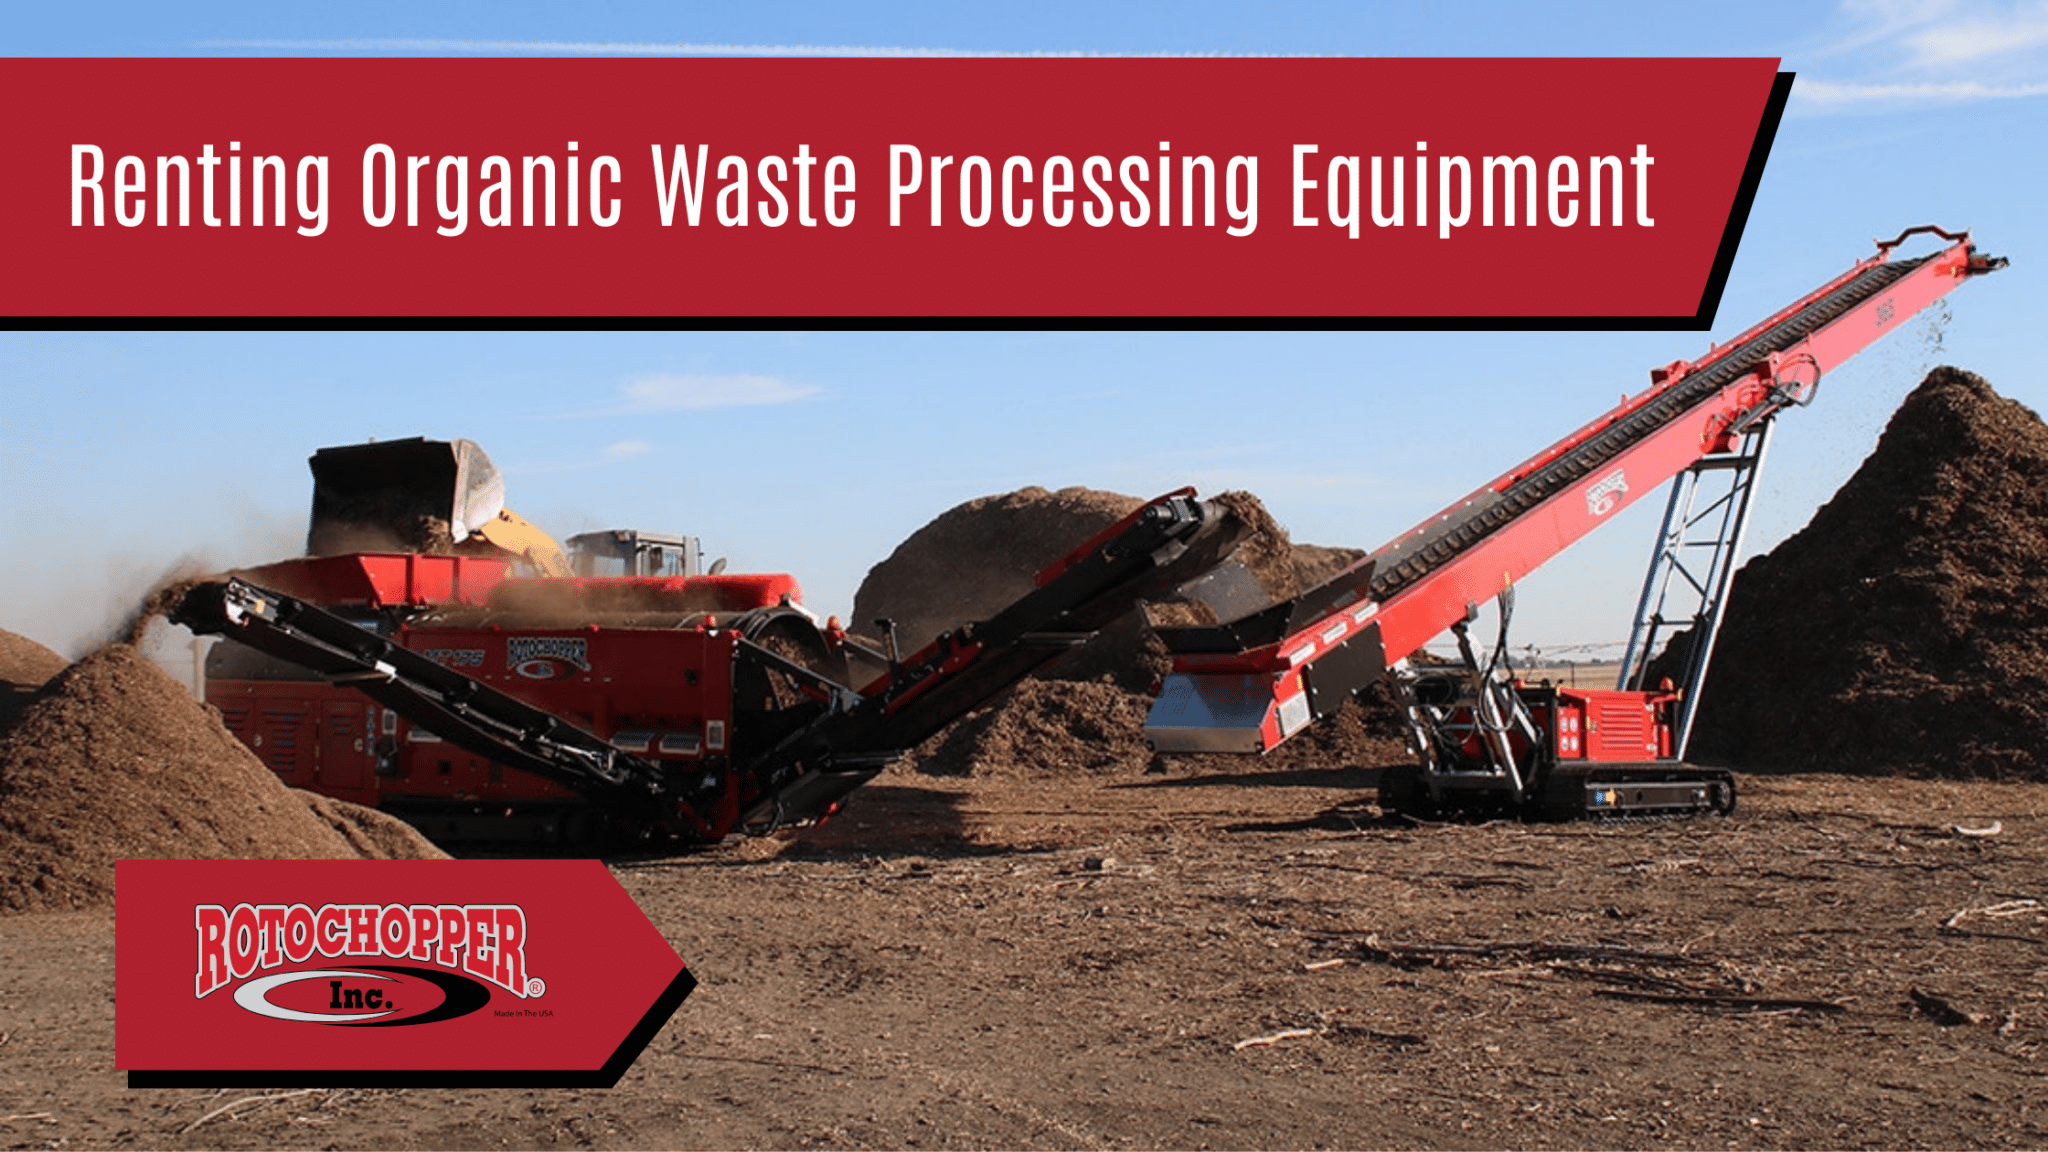 Rotochopper equipment with text overlay “Renting organic waste processing equipment”